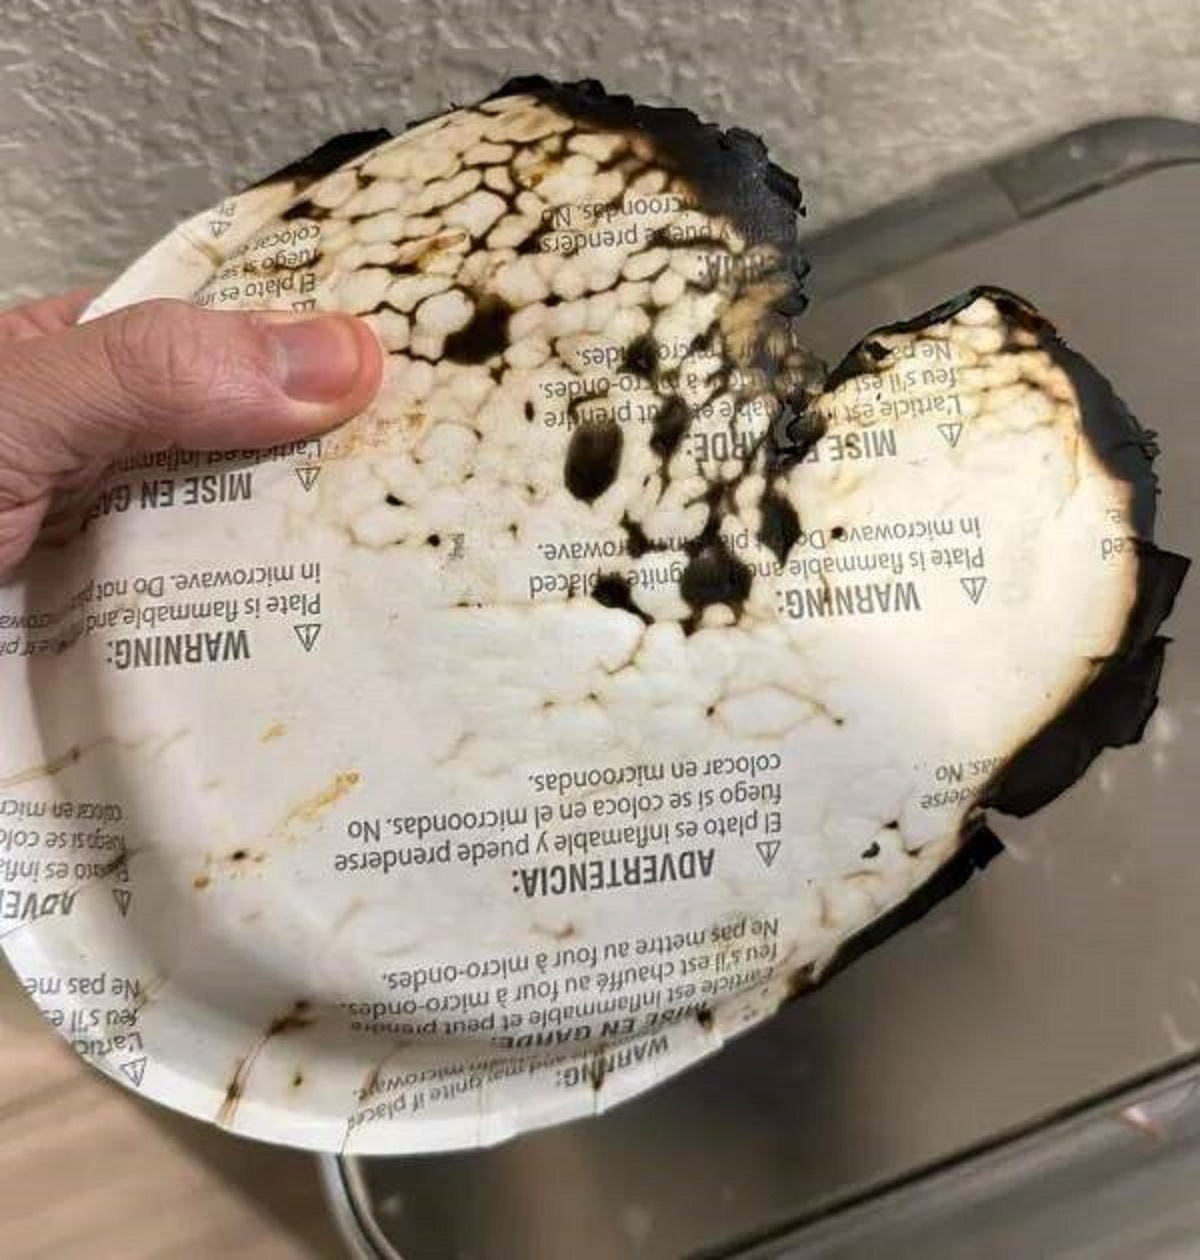 “Put this plate in the microwave without seeing the back of it”